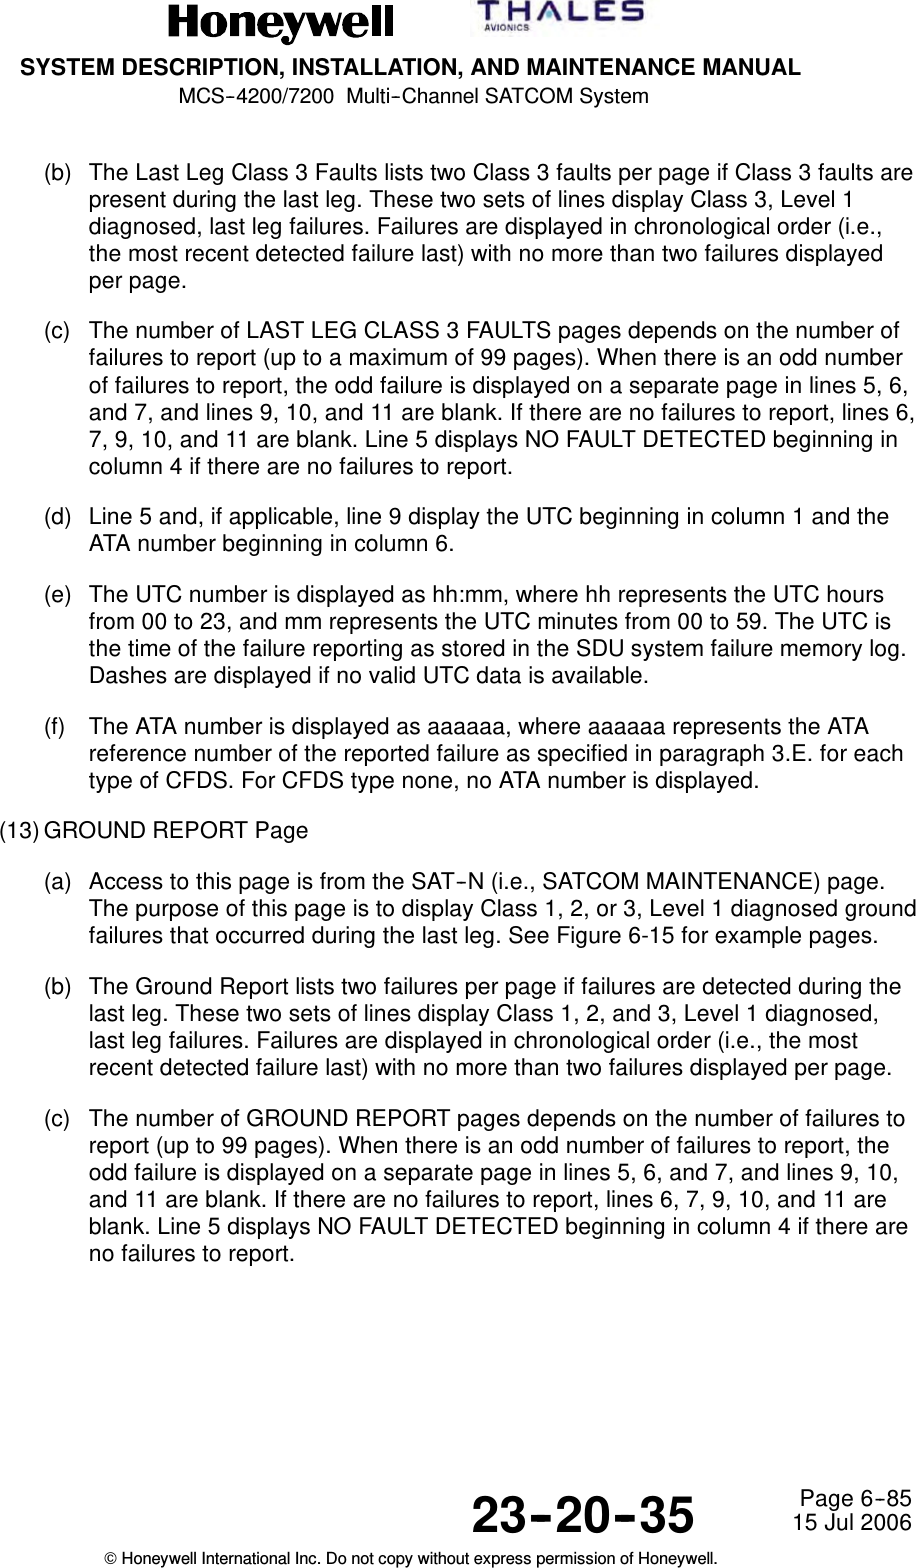 SYSTEM DESCRIPTION, INSTALLATION, AND MAINTENANCE MANUALMCS--4200/7200 Multi--Channel SATCOM System23--20--35 15 Jul 2006Honeywell International Inc. Do not copy without express permission of Honeywell.Page 6--85(b) The Last Leg Class 3 Faults lists two Class 3 faults per page if Class 3 faults arepresent during the last leg. These two sets of lines display Class 3, Level 1diagnosed, last leg failures. Failures are displayed in chronological order (i.e.,the most recent detected failure last) with no more than two failures displayedper page.(c) The number of LAST LEG CLASS 3 FAULTS pages depends on the number offailures to report (up to a maximum of 99 pages). When there is an odd numberof failures to report, the odd failure is displayed on a separate page in lines 5, 6,and 7, and lines 9, 10, and 11 are blank. If there are no failures to report, lines 6,7, 9, 10, and 11 are blank. Line 5 displays NO FAULT DETECTED beginning incolumn 4 if there are no failures to report.(d) Line 5 and, if applicable, line 9 display the UTC beginning in column 1 and theATA number beginning in column 6.(e) The UTC number is displayed as hh:mm, where hh represents the UTC hoursfrom 00 to 23, and mm represents the UTC minutes from 00 to 59. The UTC isthe time of the failure reporting as stored in the SDU system failure memory log.Dashes are displayed if no valid UTC data is available.(f) The ATA number is displayed as aaaaaa, where aaaaaa represents the ATAreference number of the reported failure as specified in paragraph 3.E. for eachtype of CFDS. For CFDS type none, no ATA number is displayed.(13) GROUND REPORT Page(a) Access to this page is from the SAT--N (i.e., SATCOM MAINTENANCE) page.The purpose of this page is to display Class 1, 2, or 3, Level 1 diagnosed groundfailures that occurred during the last leg. See Figure 6-15 for example pages.(b) The Ground Report lists two failures per page if failures are detected during thelast leg. These two sets of lines display Class 1, 2, and 3, Level 1 diagnosed,last leg failures. Failures are displayed in chronological order (i.e., the mostrecent detected failure last) with no more than two failures displayed per page.(c) The number of GROUND REPORT pages depends on the number of failures toreport (up to 99 pages). When there is an odd number of failures to report, theodd failure is displayed on a separate page in lines 5, 6, and 7, and lines 9, 10,and 11 are blank. If there are no failures to report, lines 6, 7, 9, 10, and 11 areblank. Line 5 displays NO FAULT DETECTED beginning in column 4 if there areno failures to report.